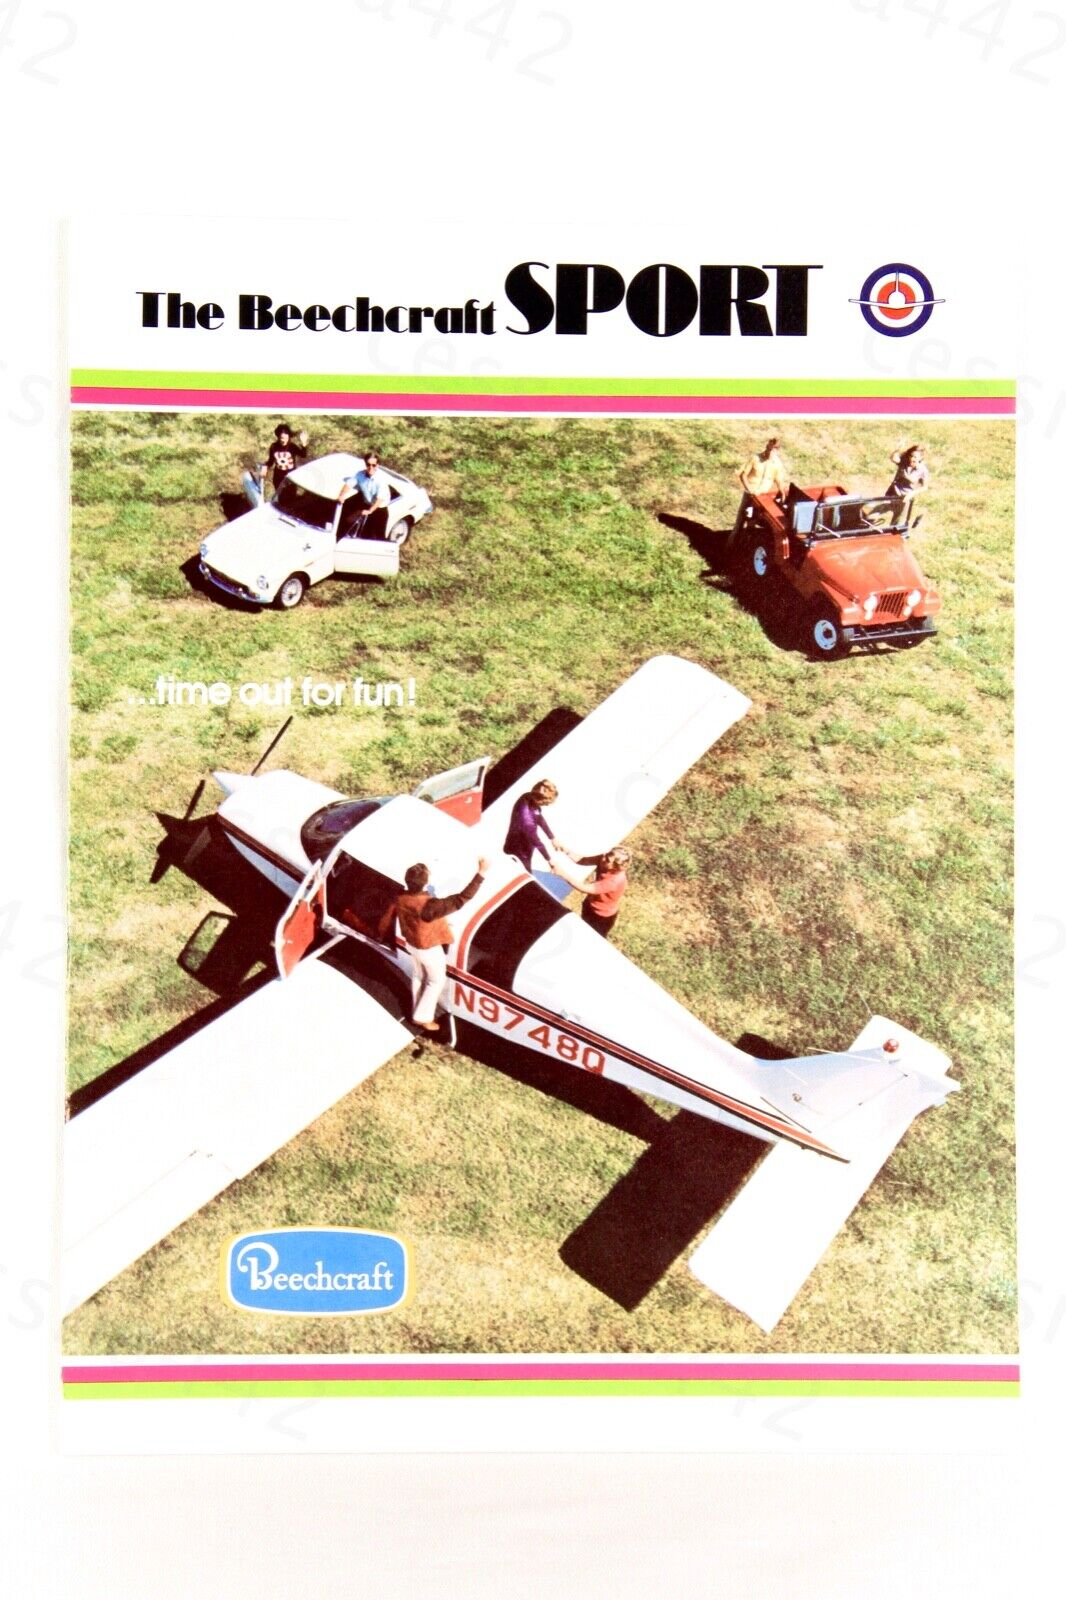 BEECHCRAFT SPORT Brochure Vintage 6 Pages USA Gift New Old Stock 1973 Rare Gift